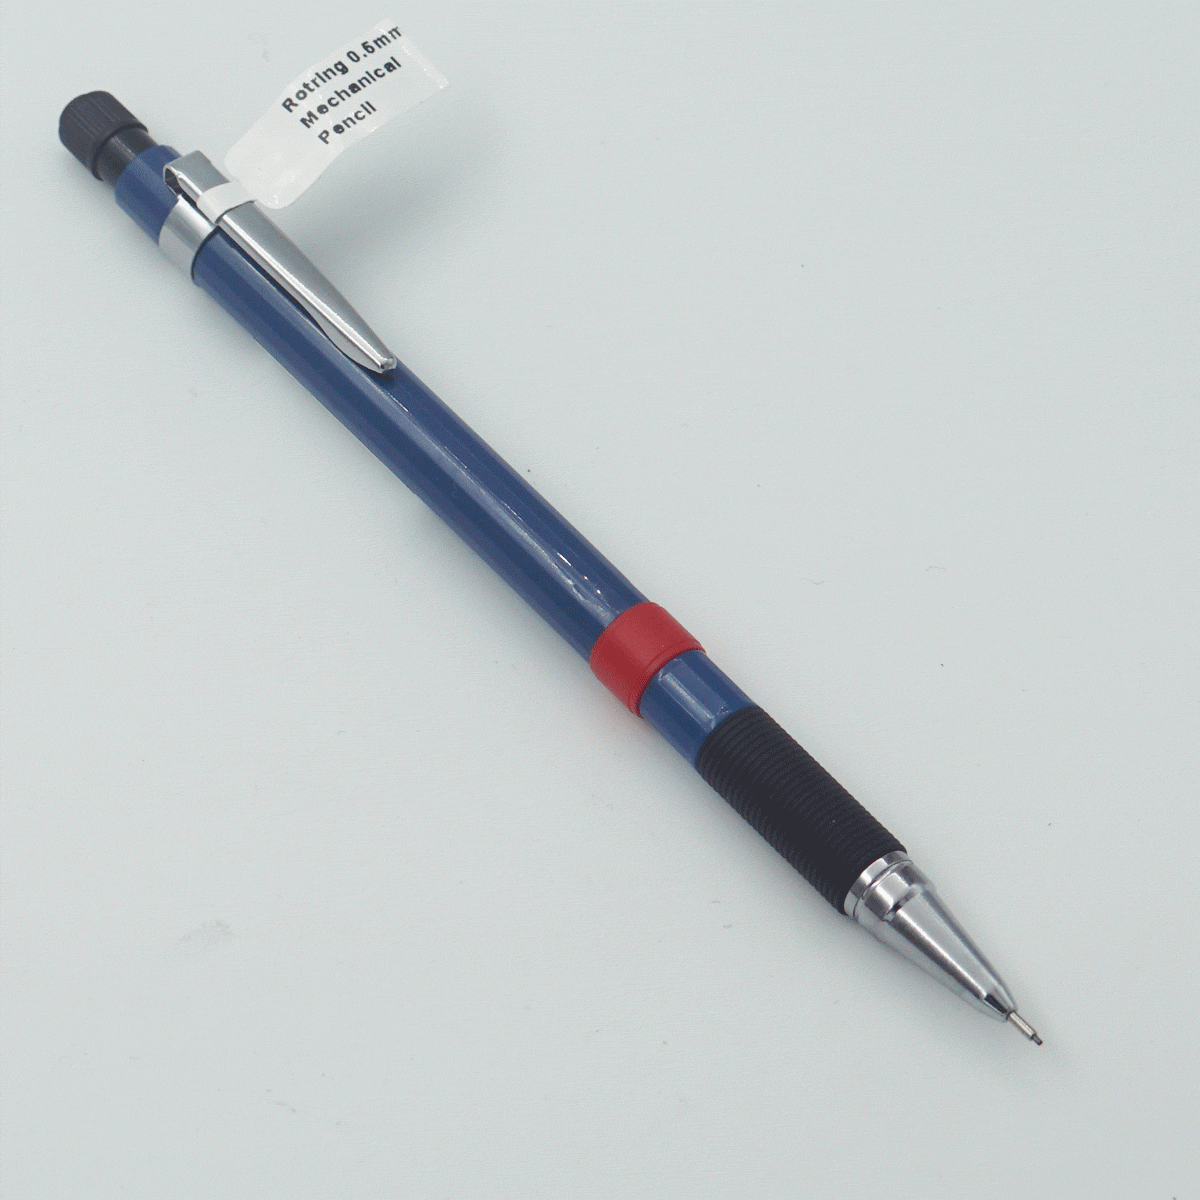 Rotring Visumax 0.5mm Blue Color Body With Silver Clip Mechanical Pencil SKU 24403